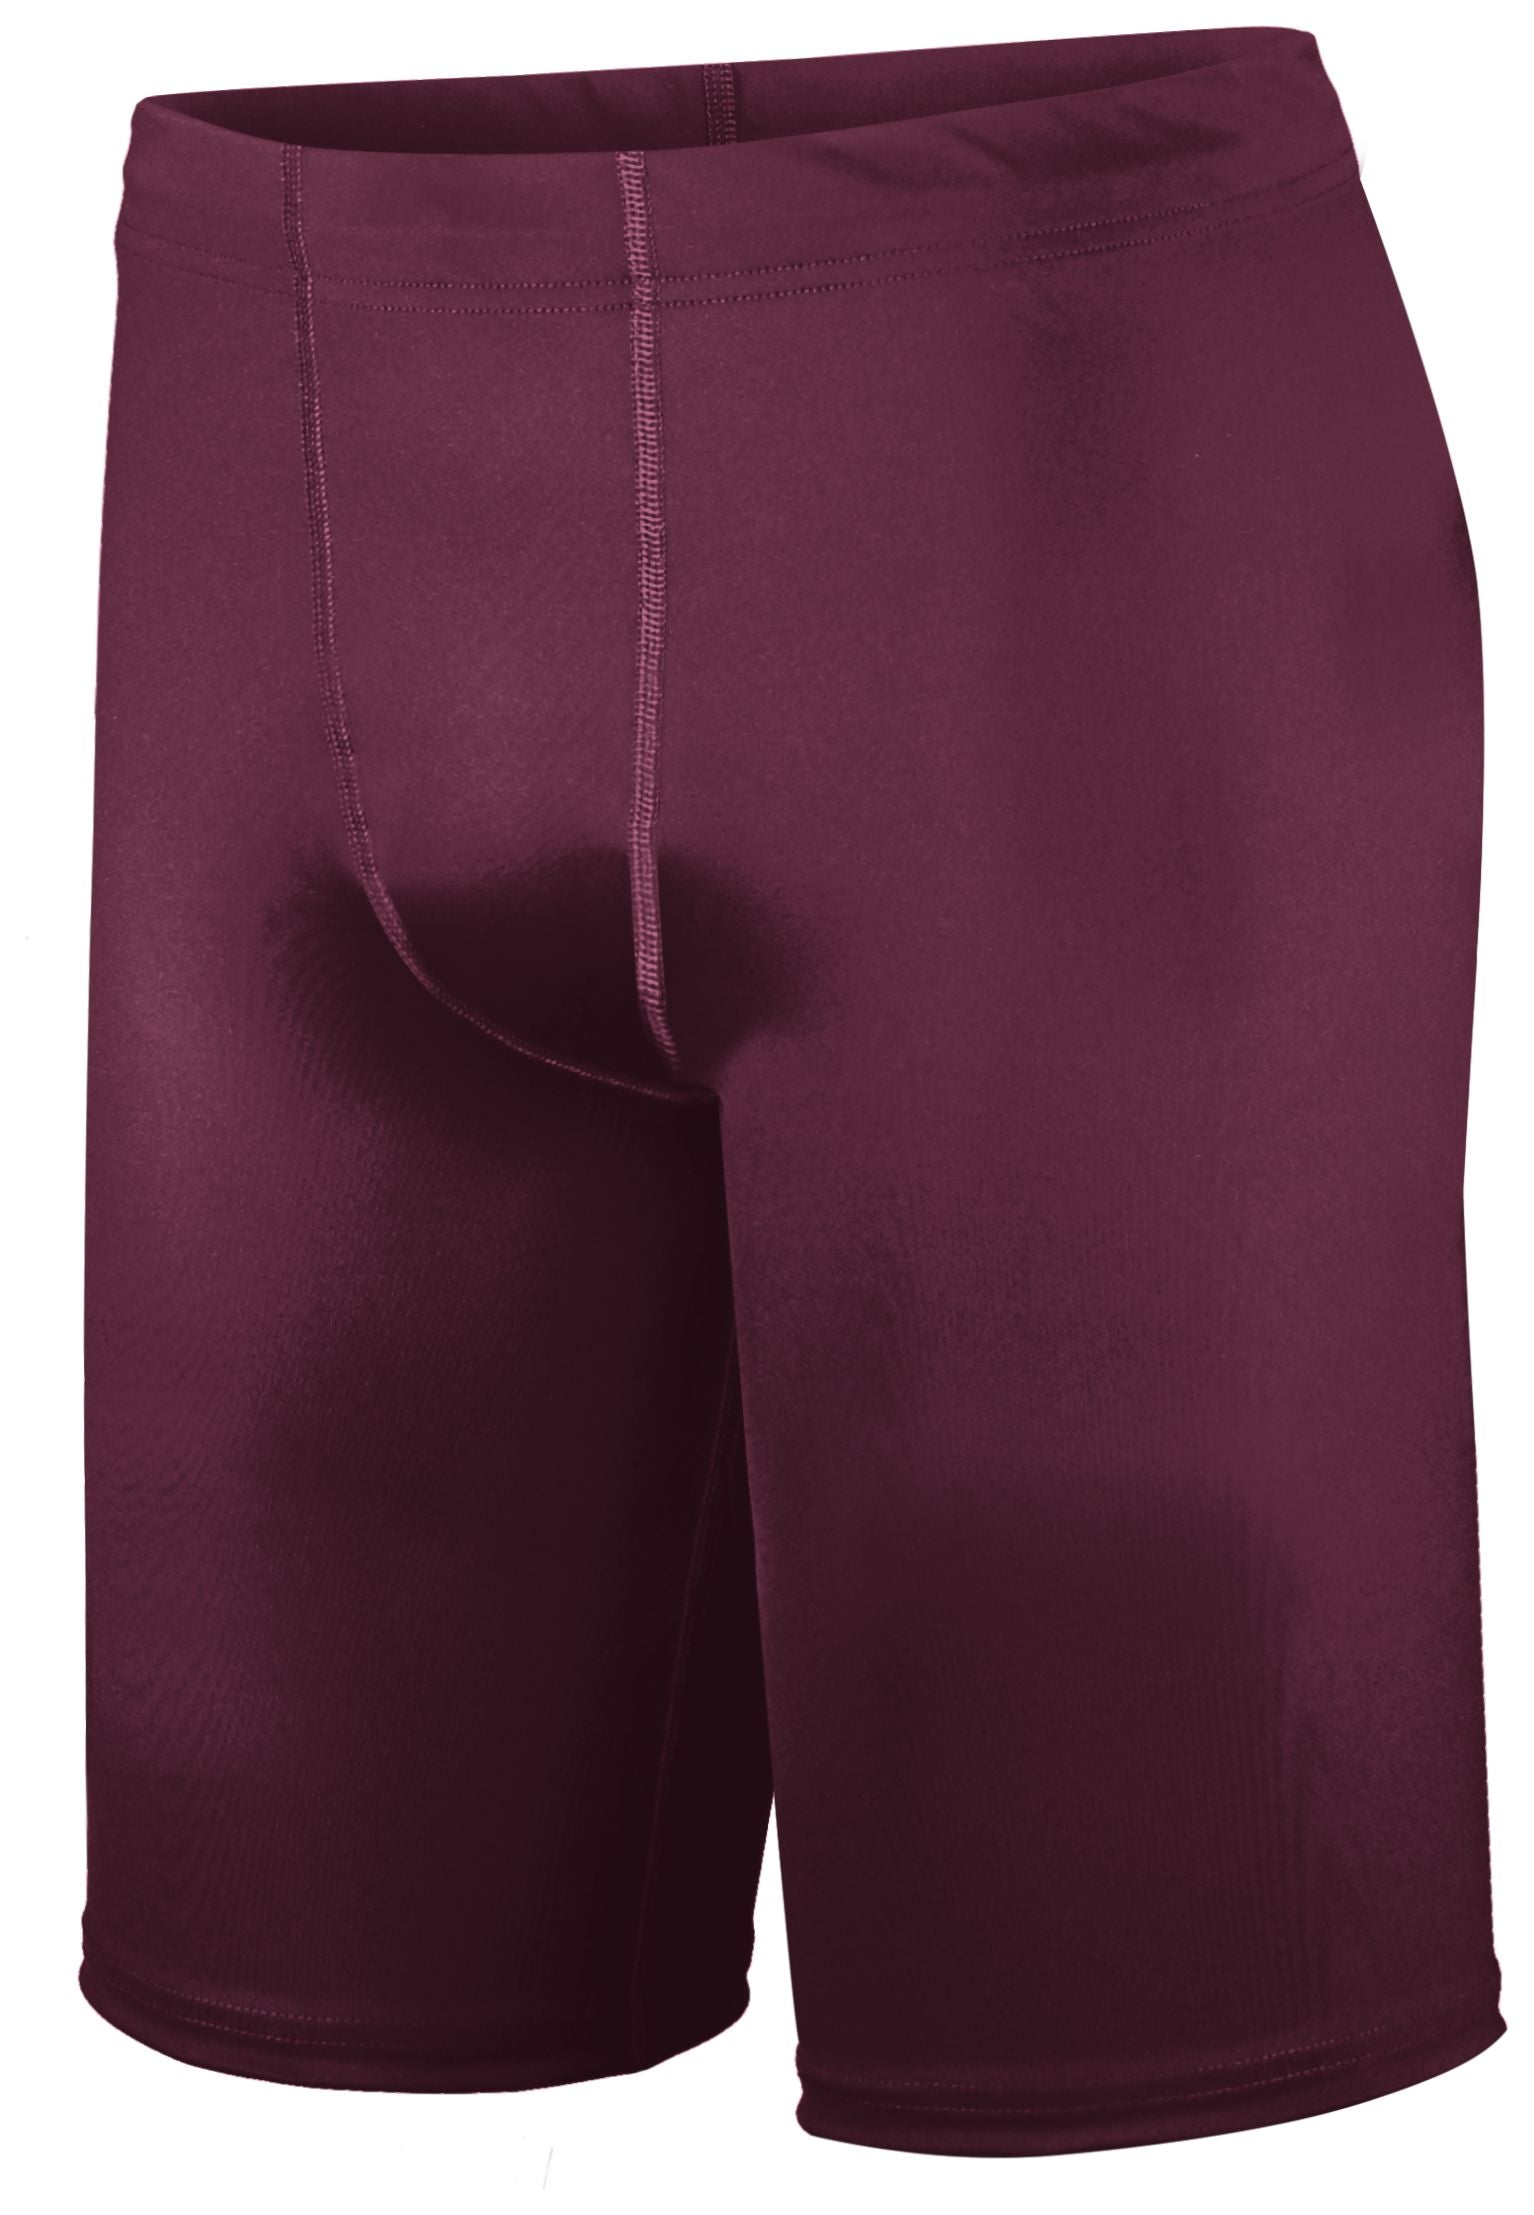 Holloway Pr Max Compression Shorts in Maroon (Hlw)  -Part of the Adult, Adult-Shorts, Track-Field, Holloway product lines at KanaleyCreations.com